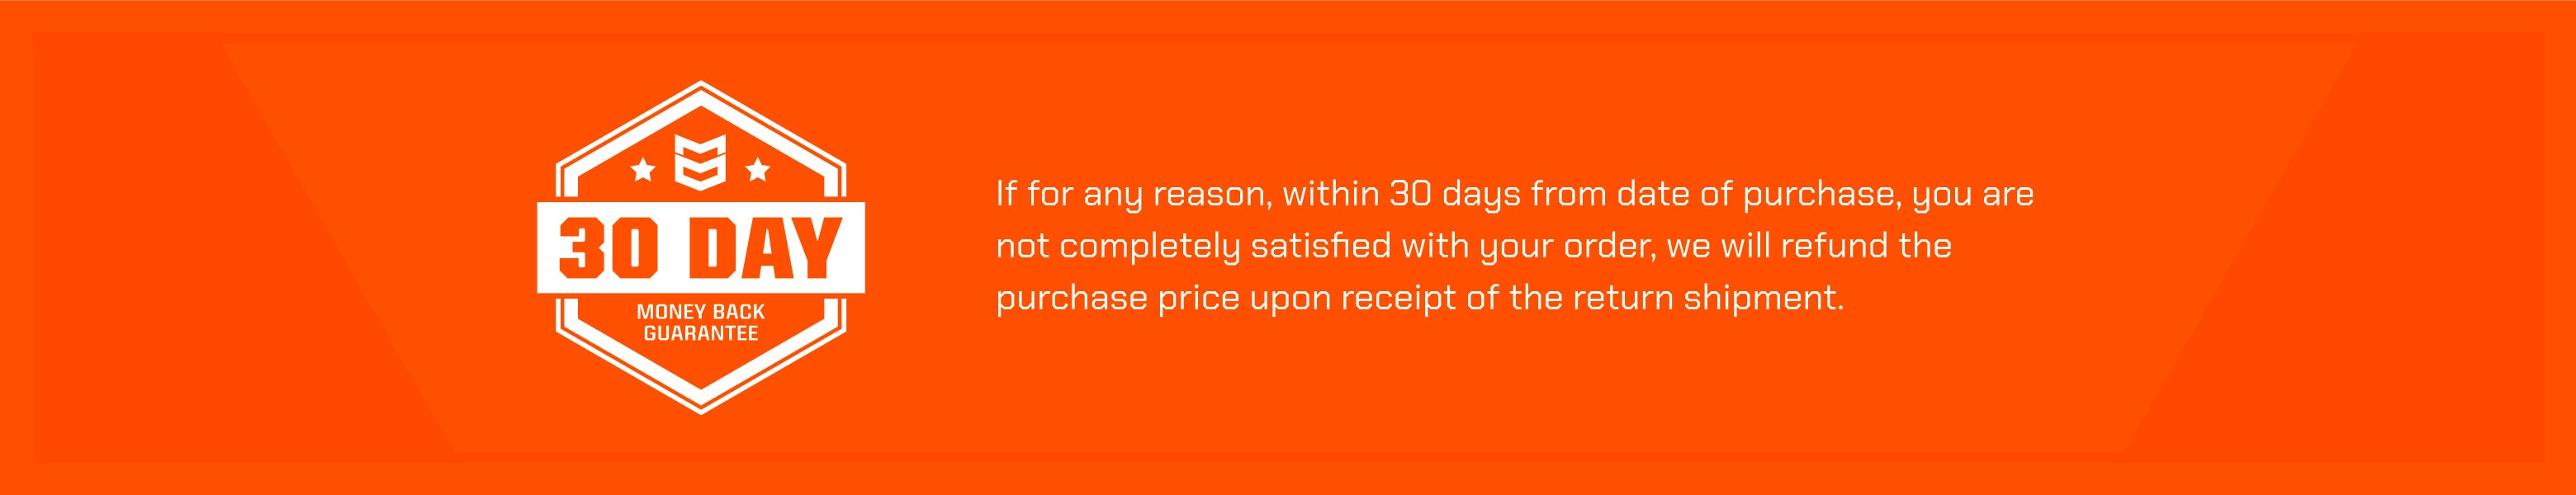 MTN OPS GUARANTEE  |  If for any reason, within 30 days from date of purchase, you are not completely satisfied with your order we will refund the purchase price upon receipt of the return shipment.